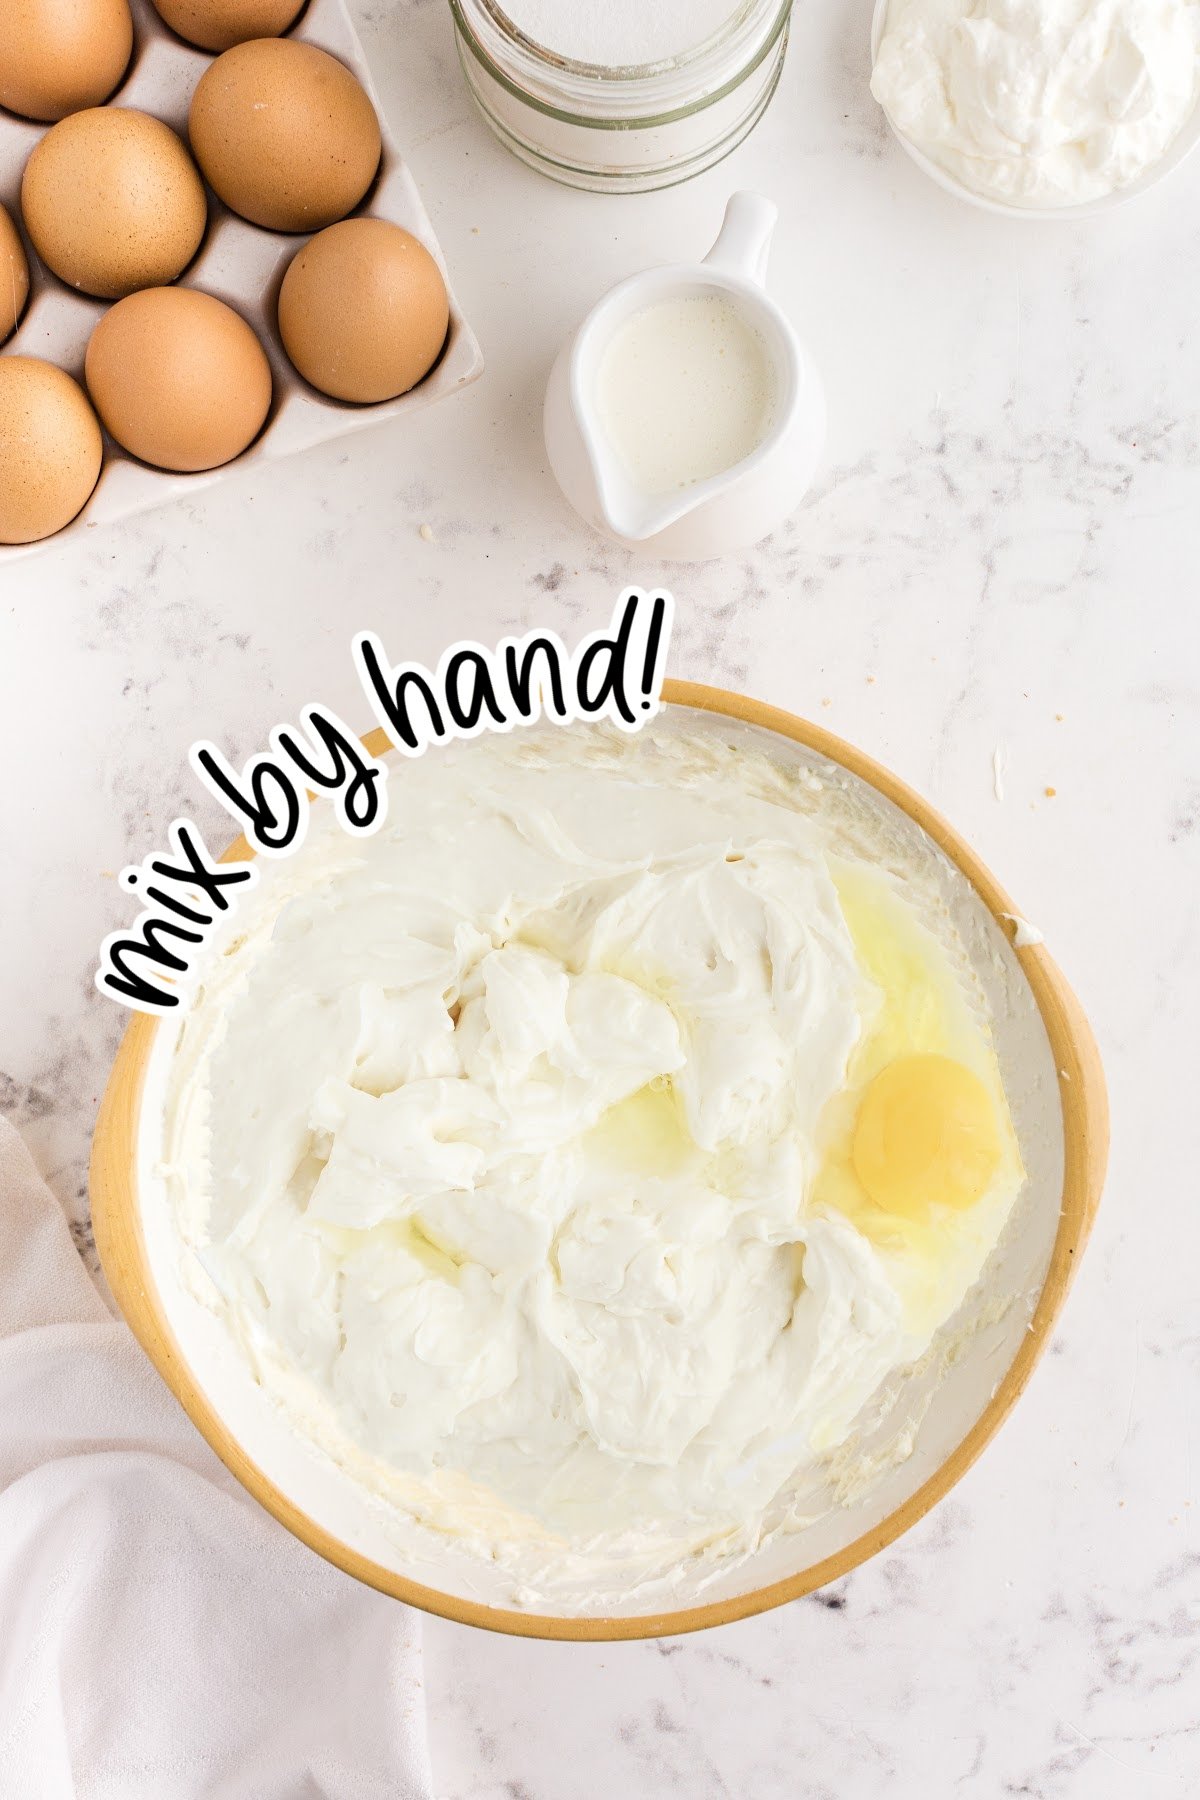 Eggs being added into the cream cheese mixture one at a time, with text overlay.